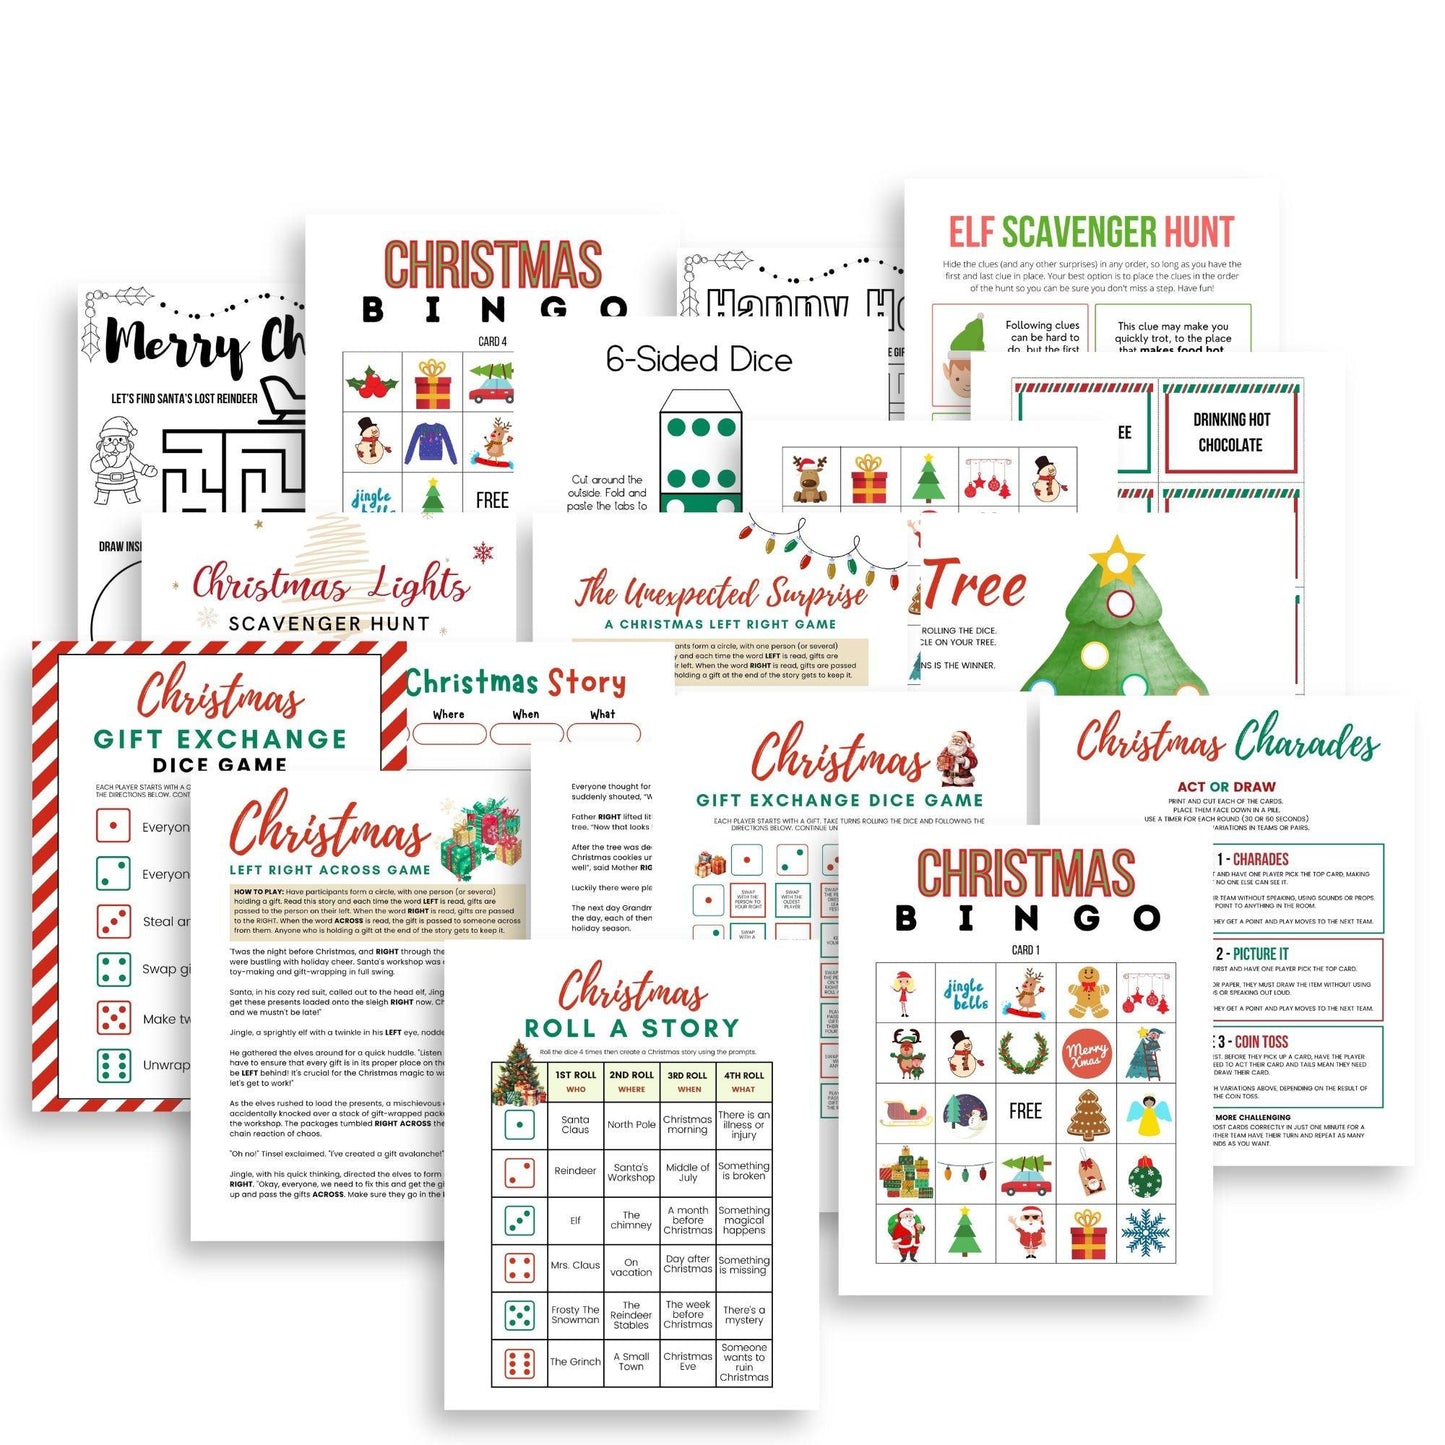 Christmas Party Game Bundle - Simplify Create Inspire